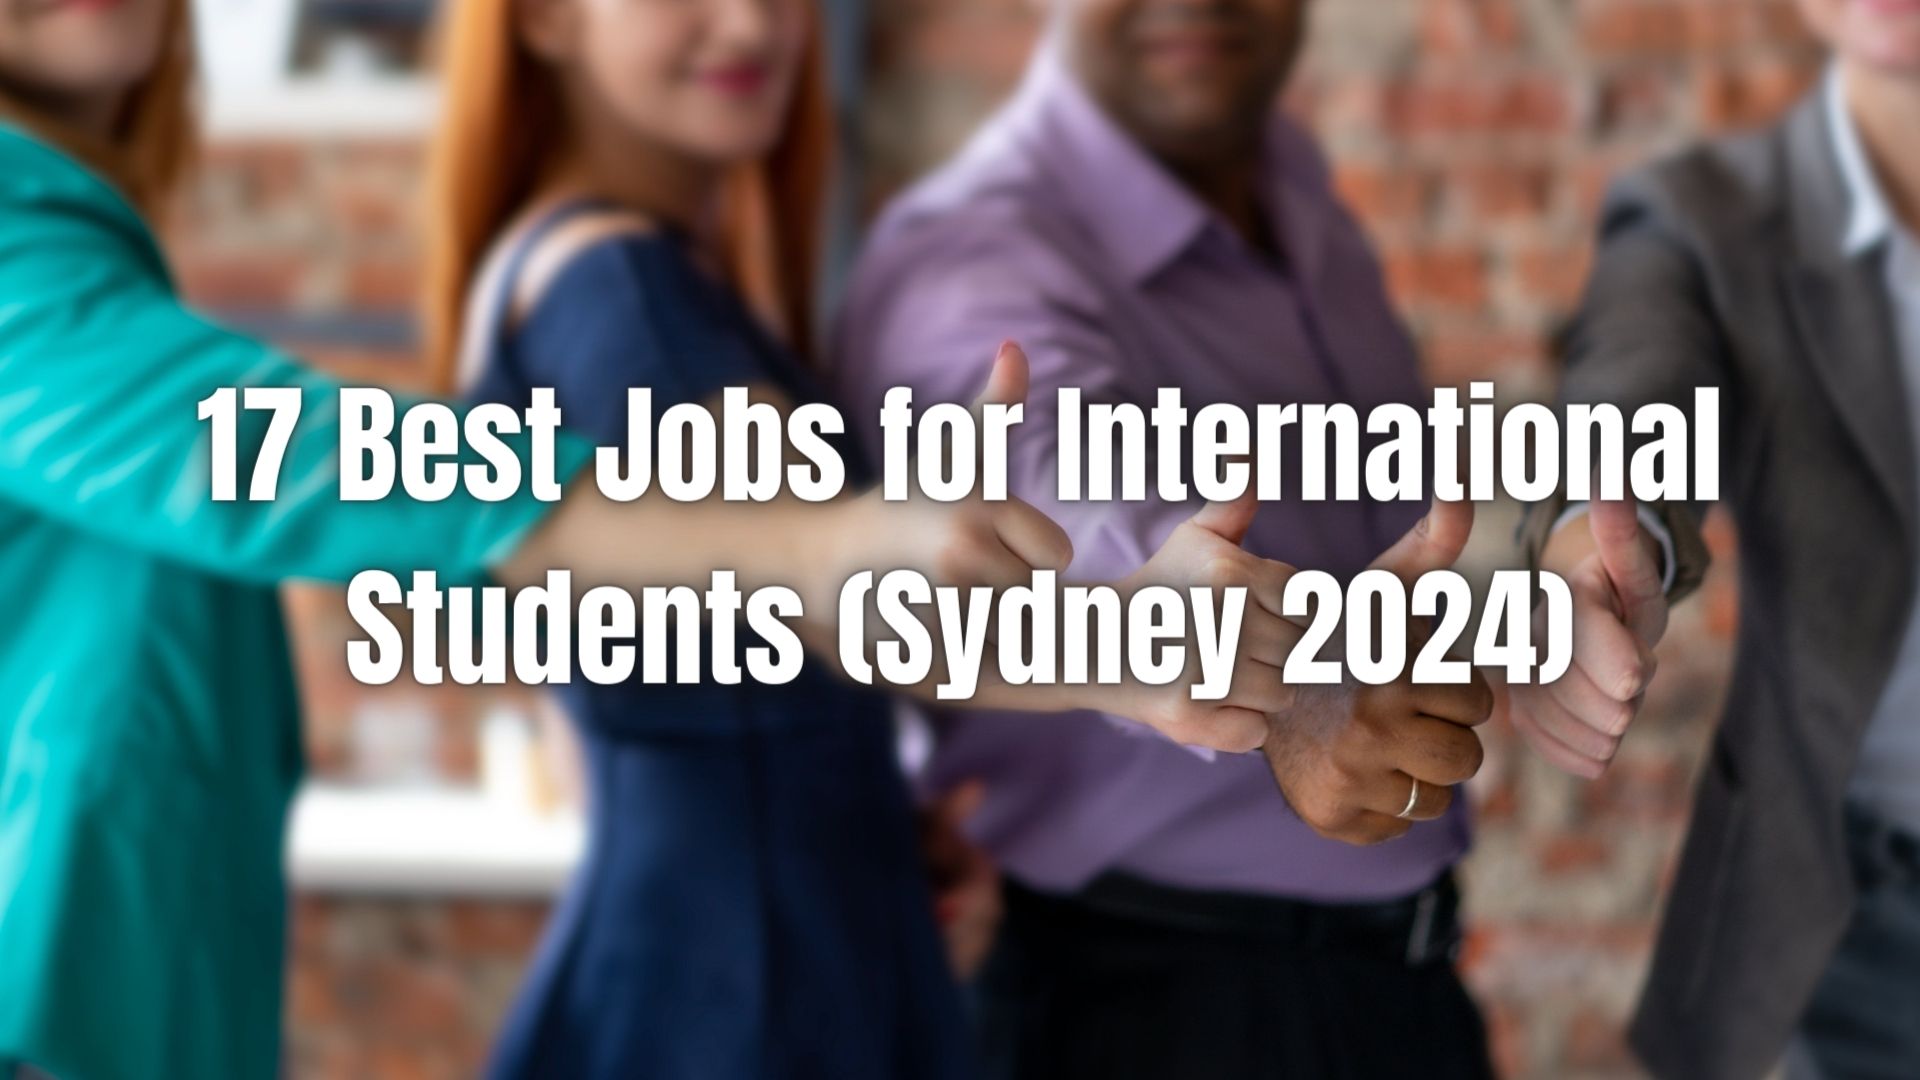 Limited Time to Find Your Sydney Student Job (2024)? Act Now! Discover our top 17 picks across various fields. Don't miss these opportunities!